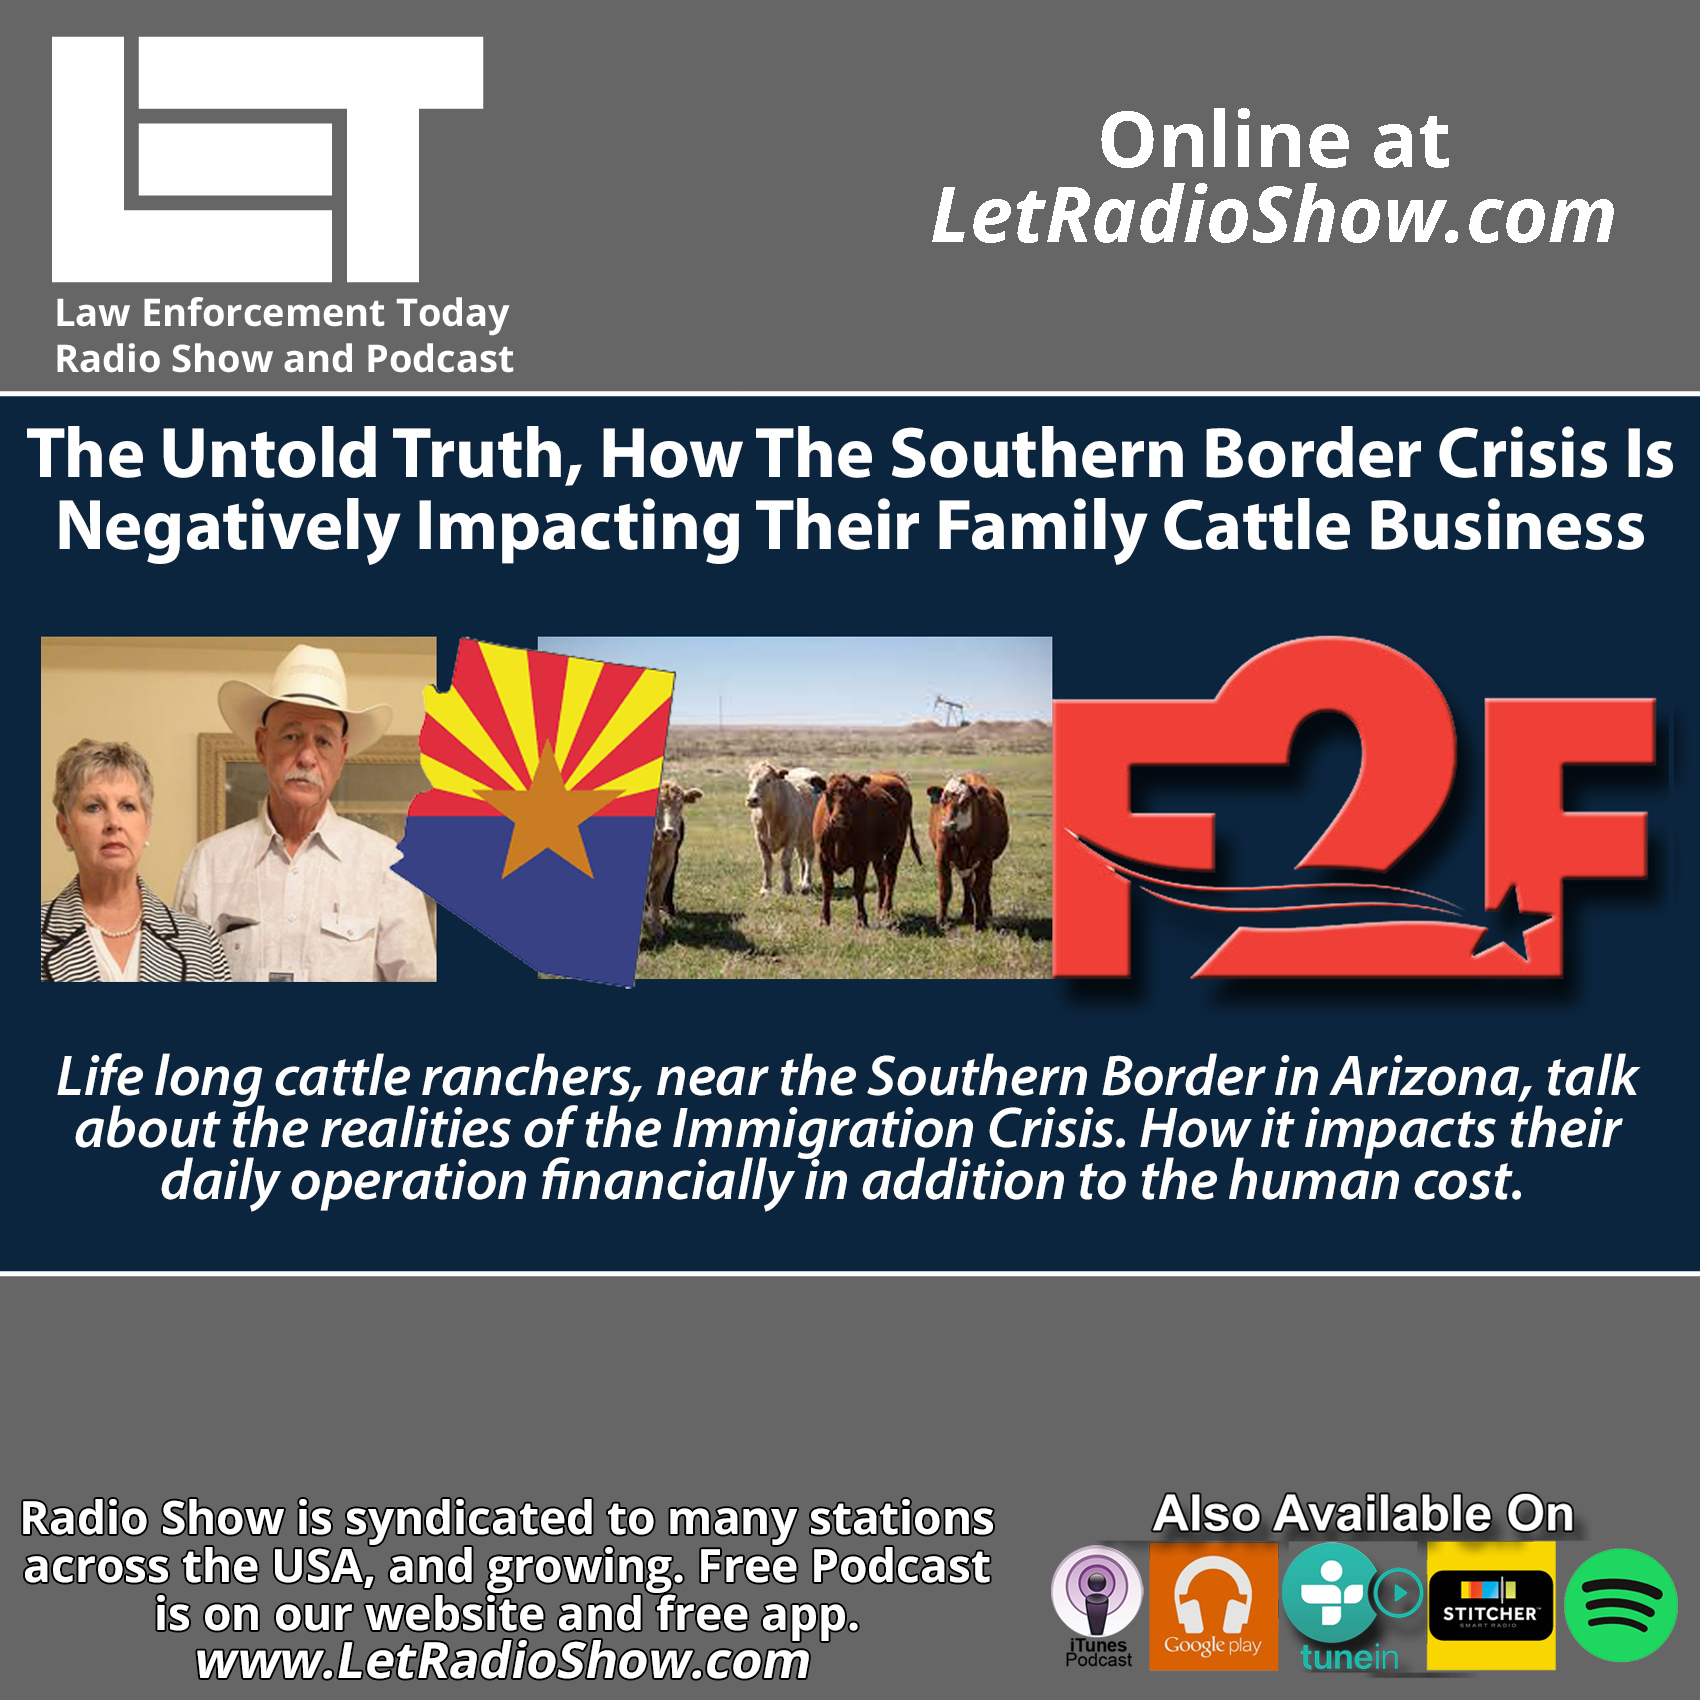 Illegal Immigration And The Impact on Family Business